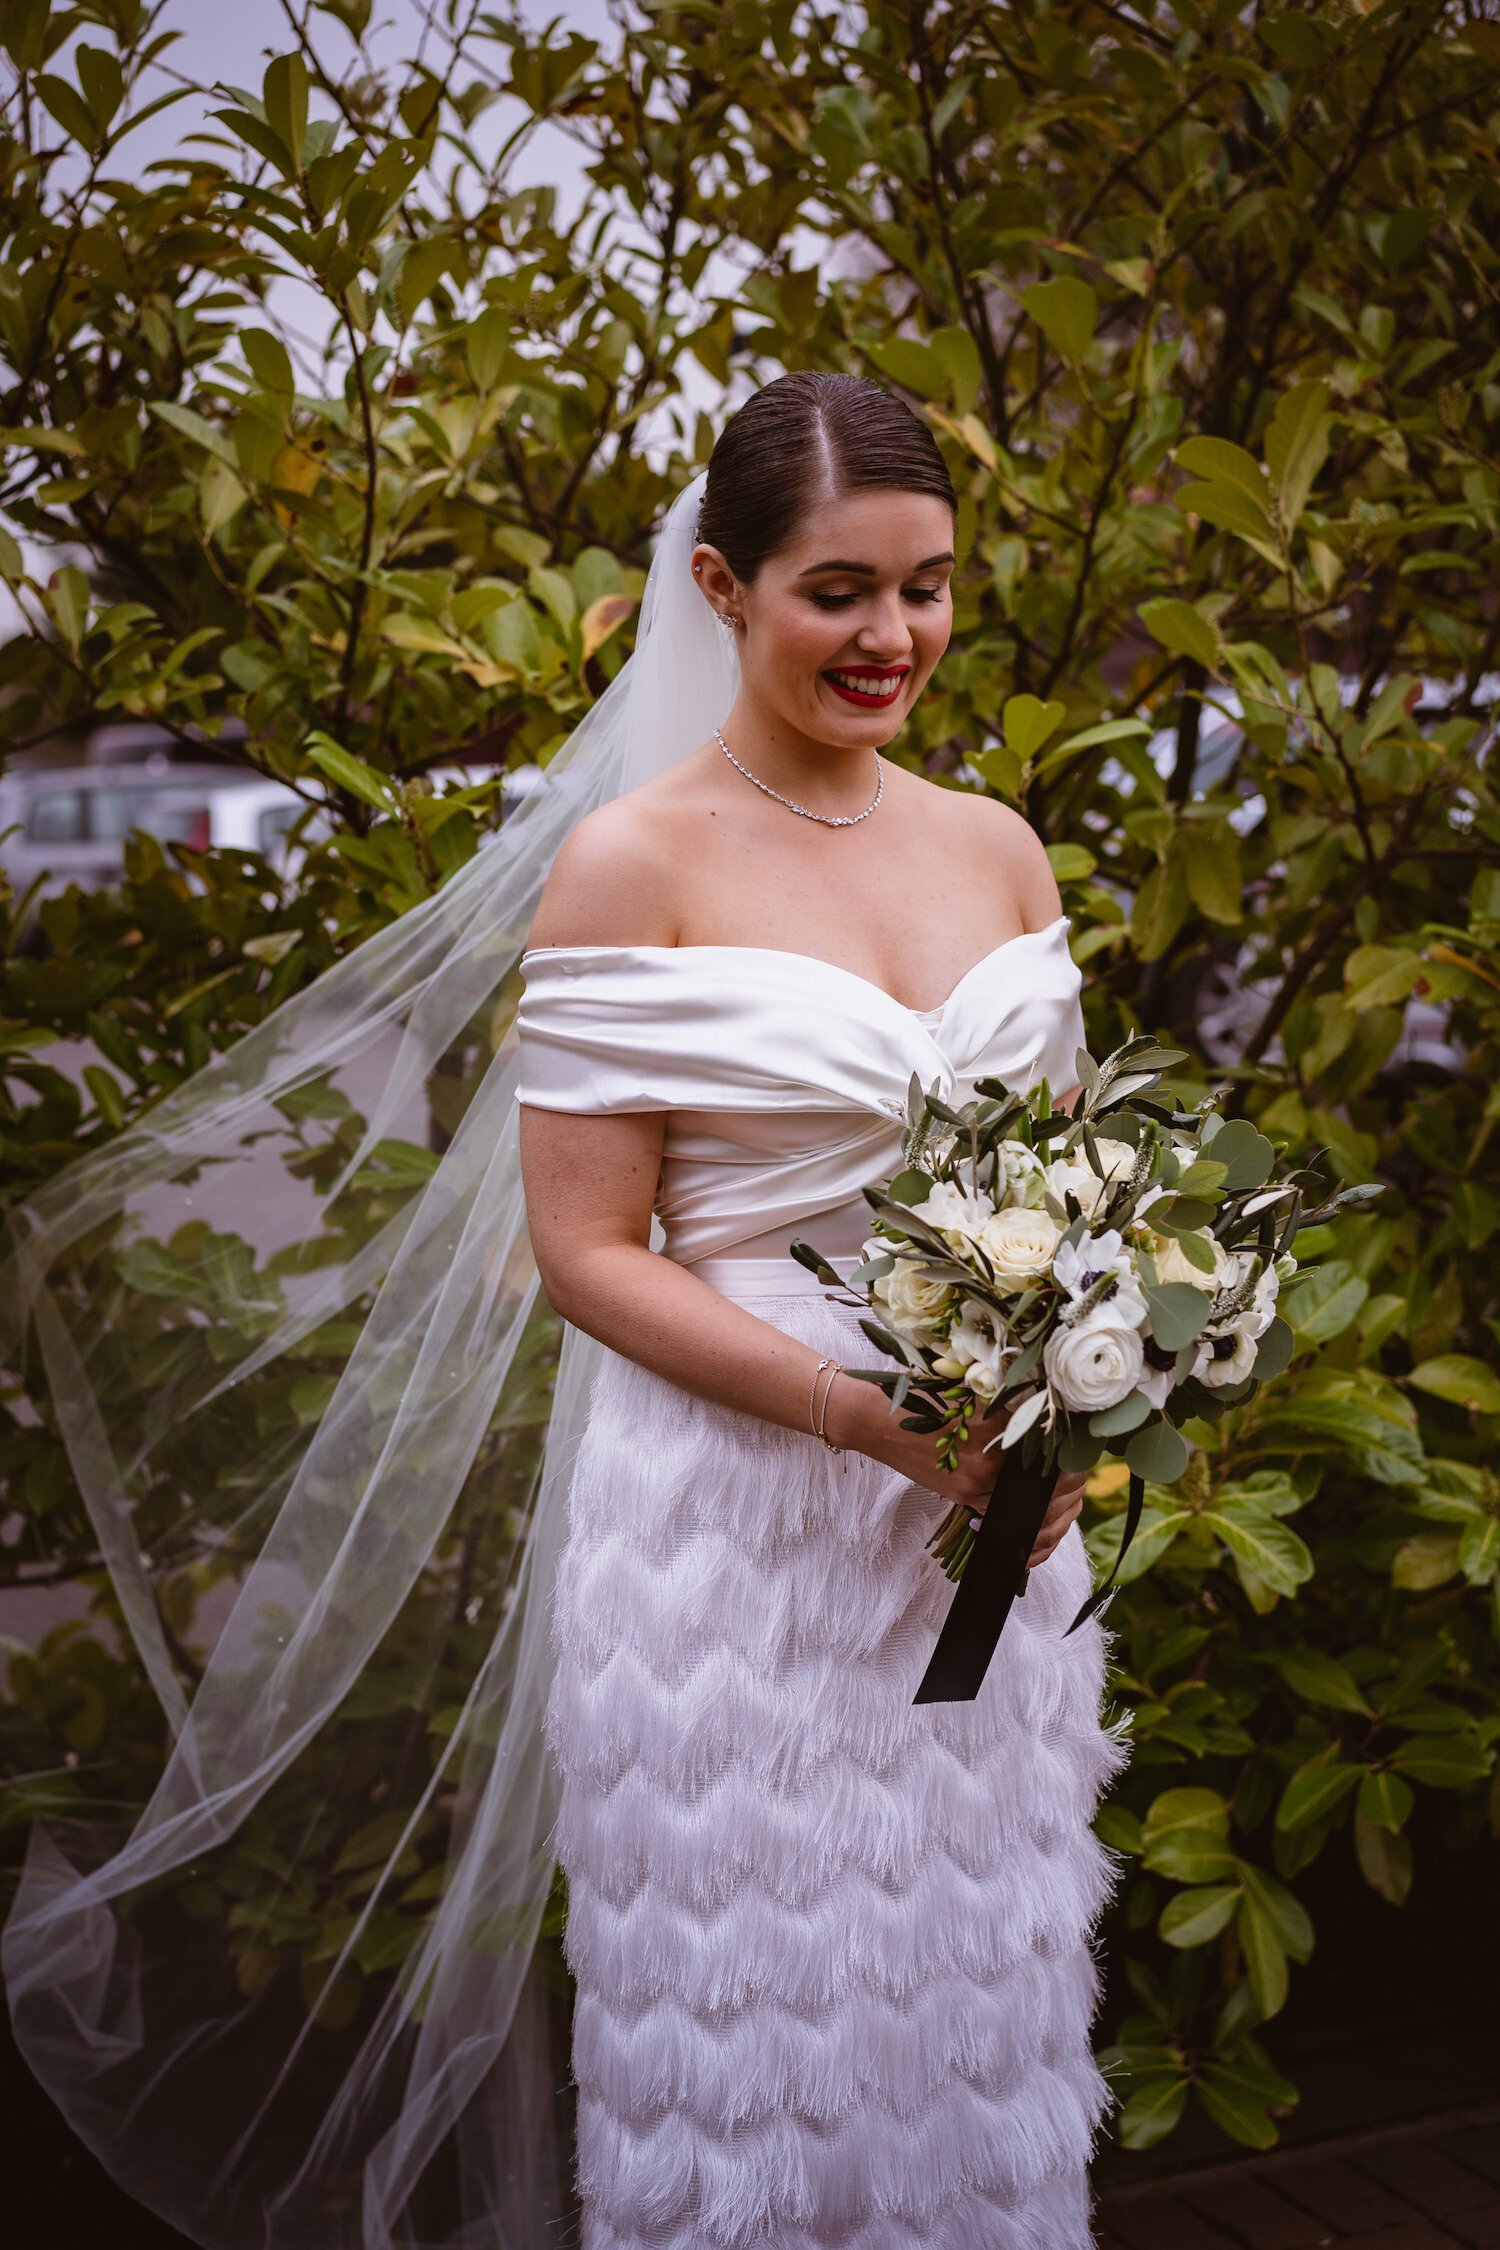 Beautiful bride Emma wears the Ivy skirt and Daffodil top by Halfpenny London for her wedding day